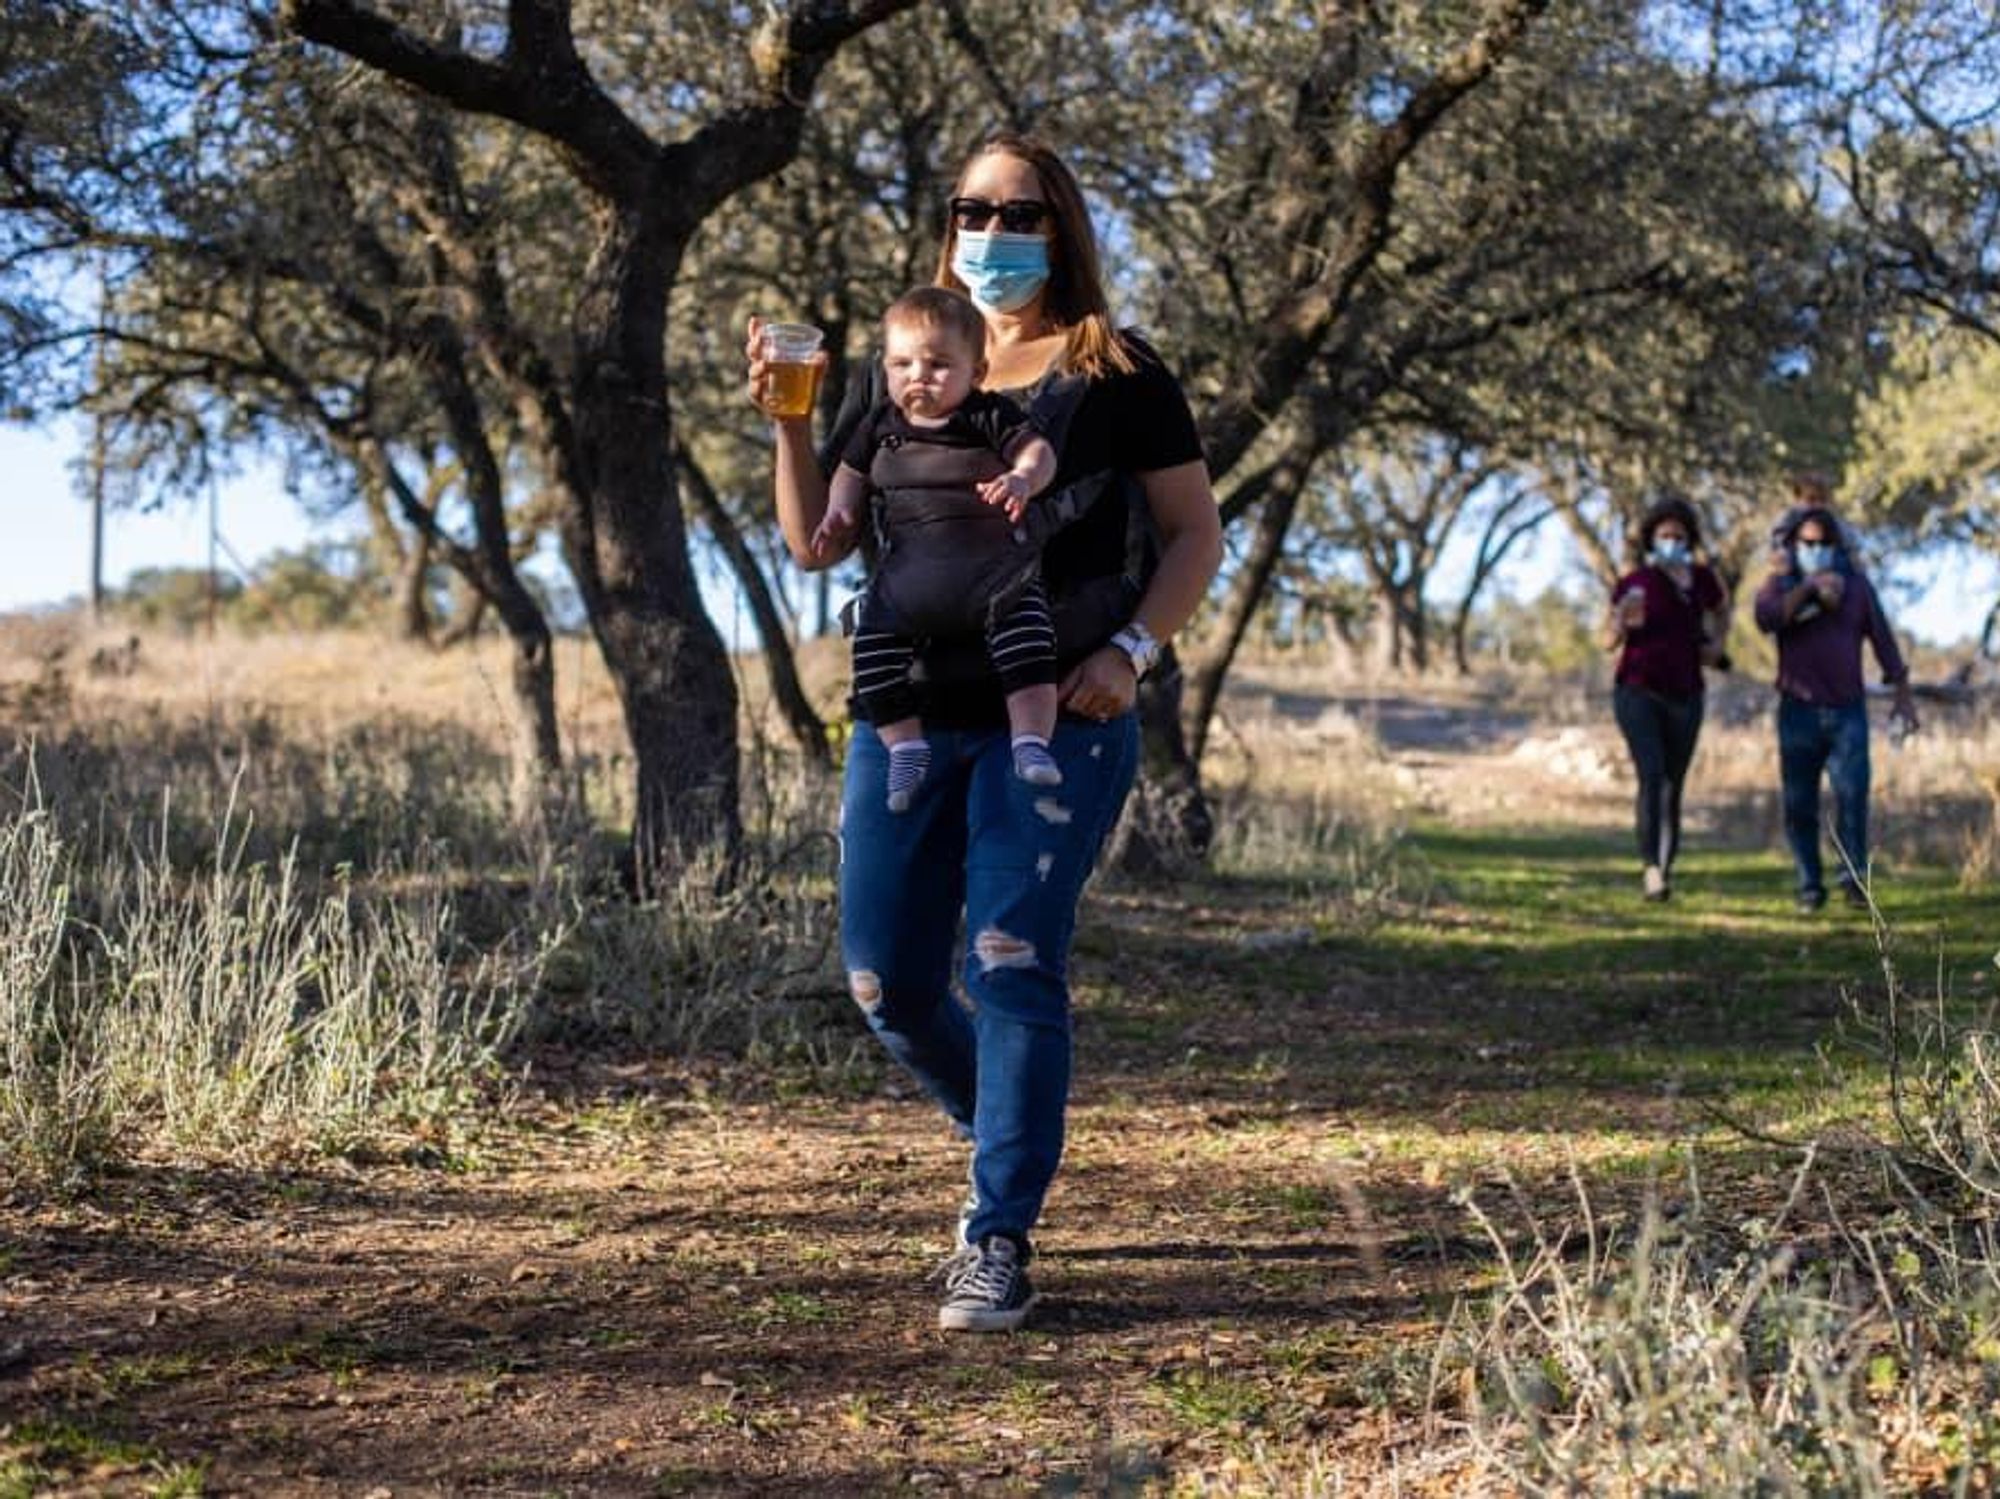 Woman walking with baby and holding a beer